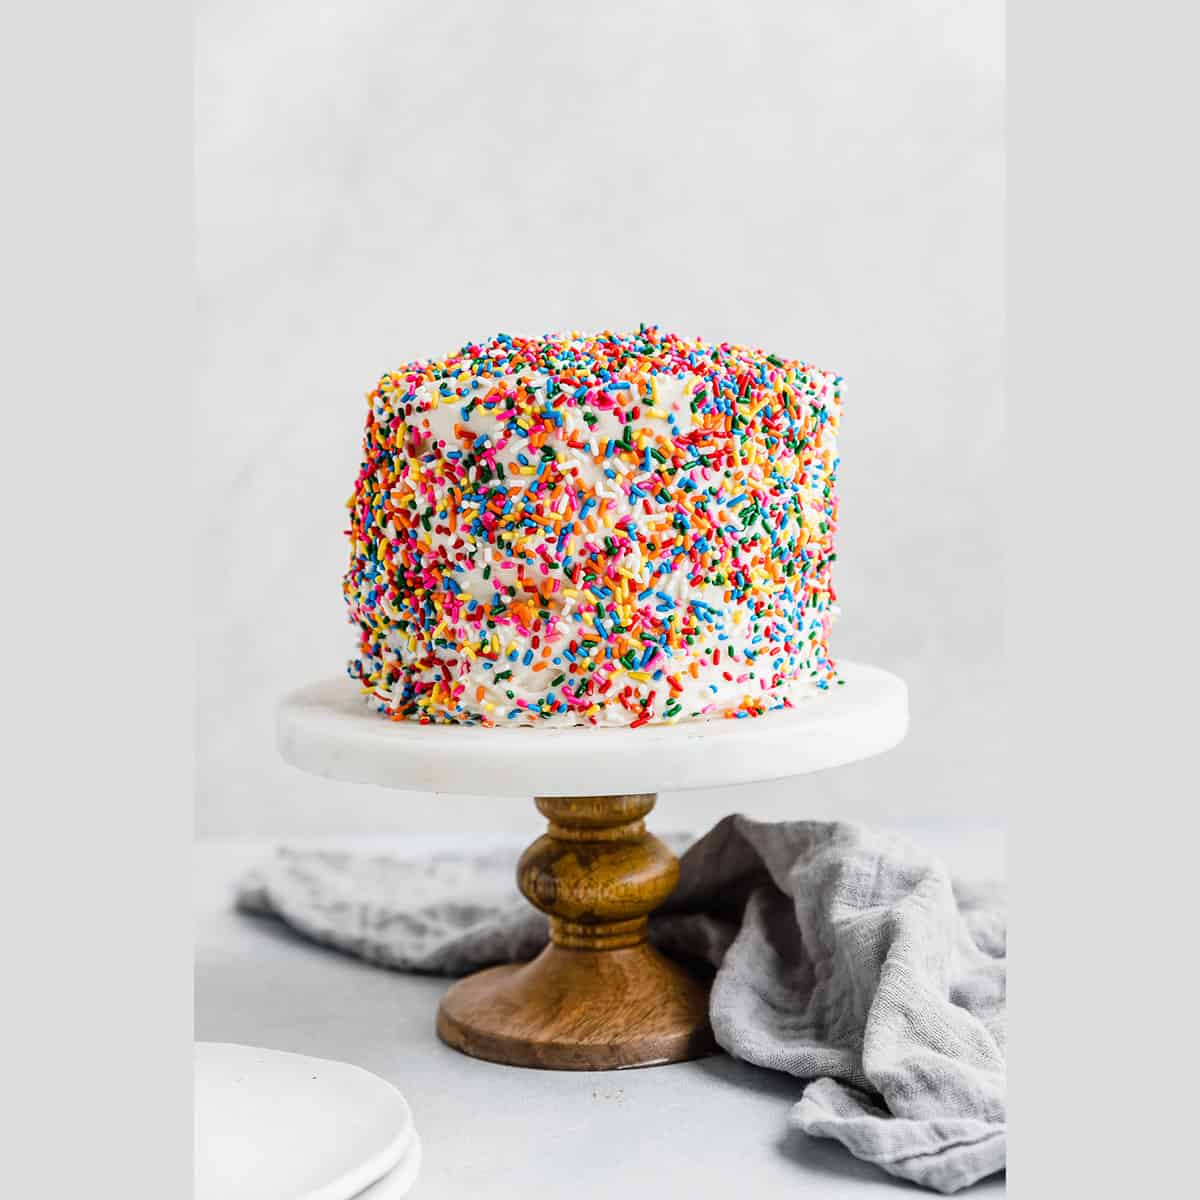 A sprinkle covered Smash Cake Recipe on a white marbled cake stand.